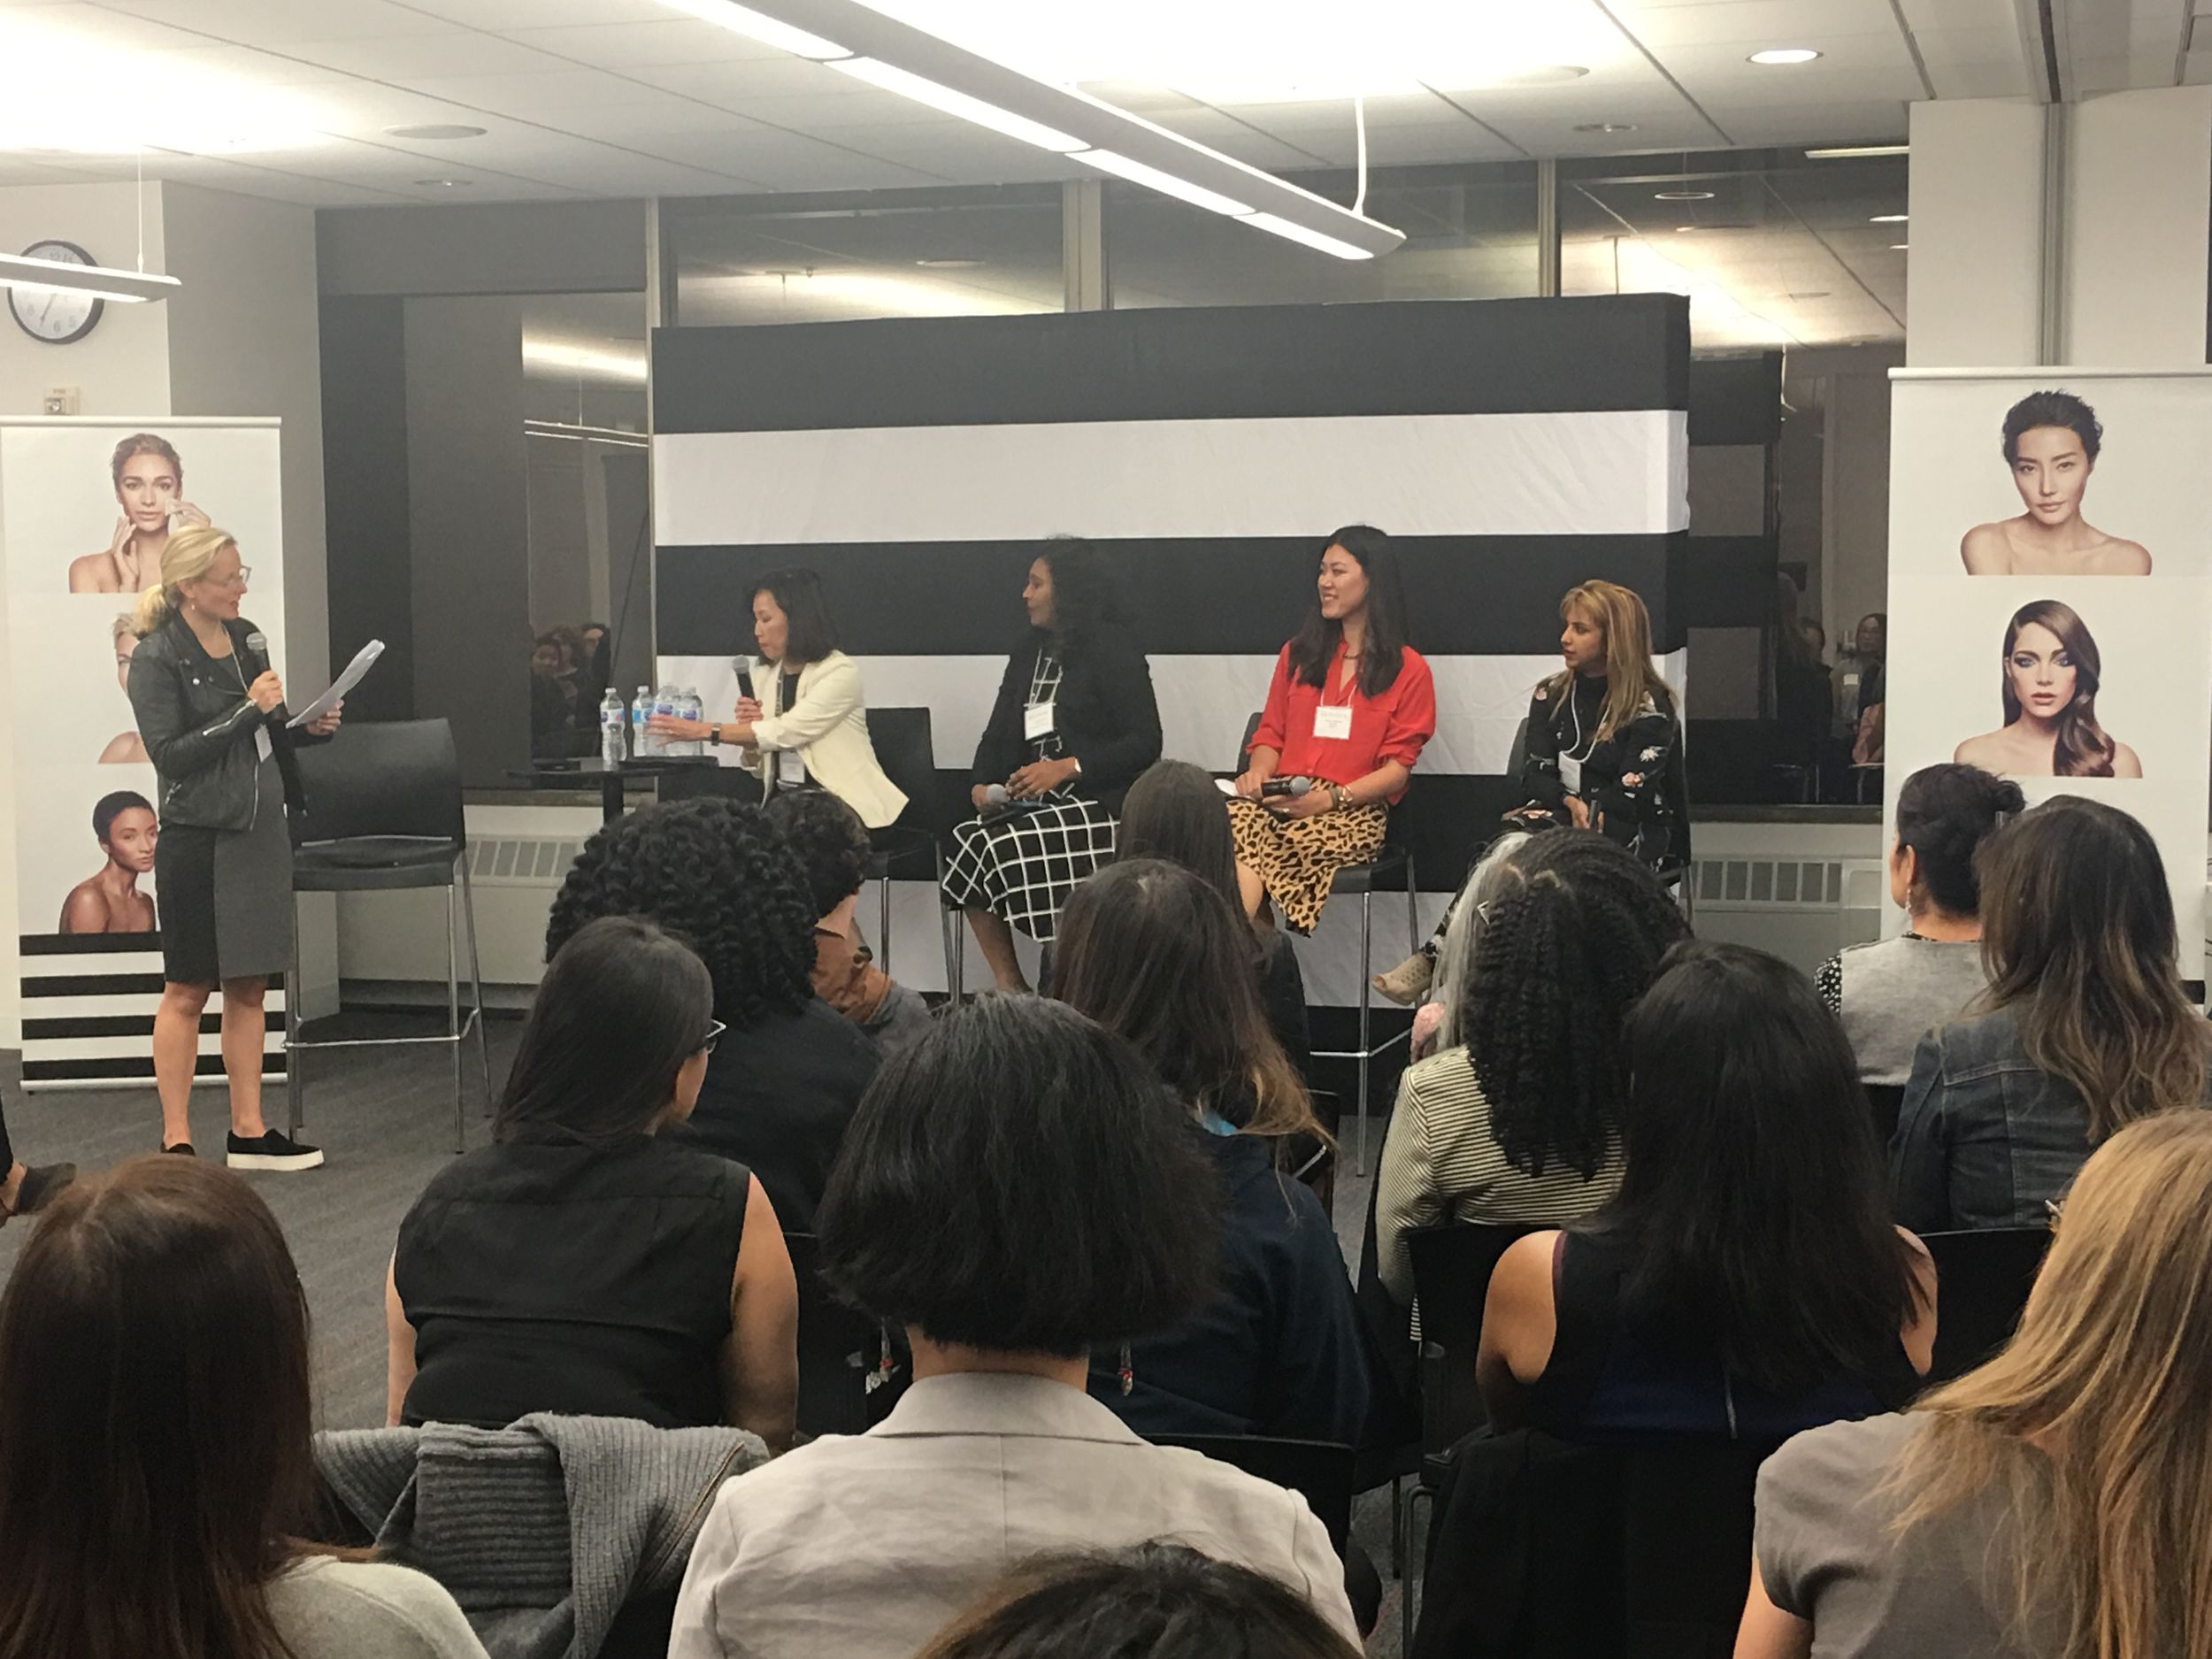 At an Exclusive San Francisco Event, Sephora Uncovers Why They Have More Than 60% Women In Tech